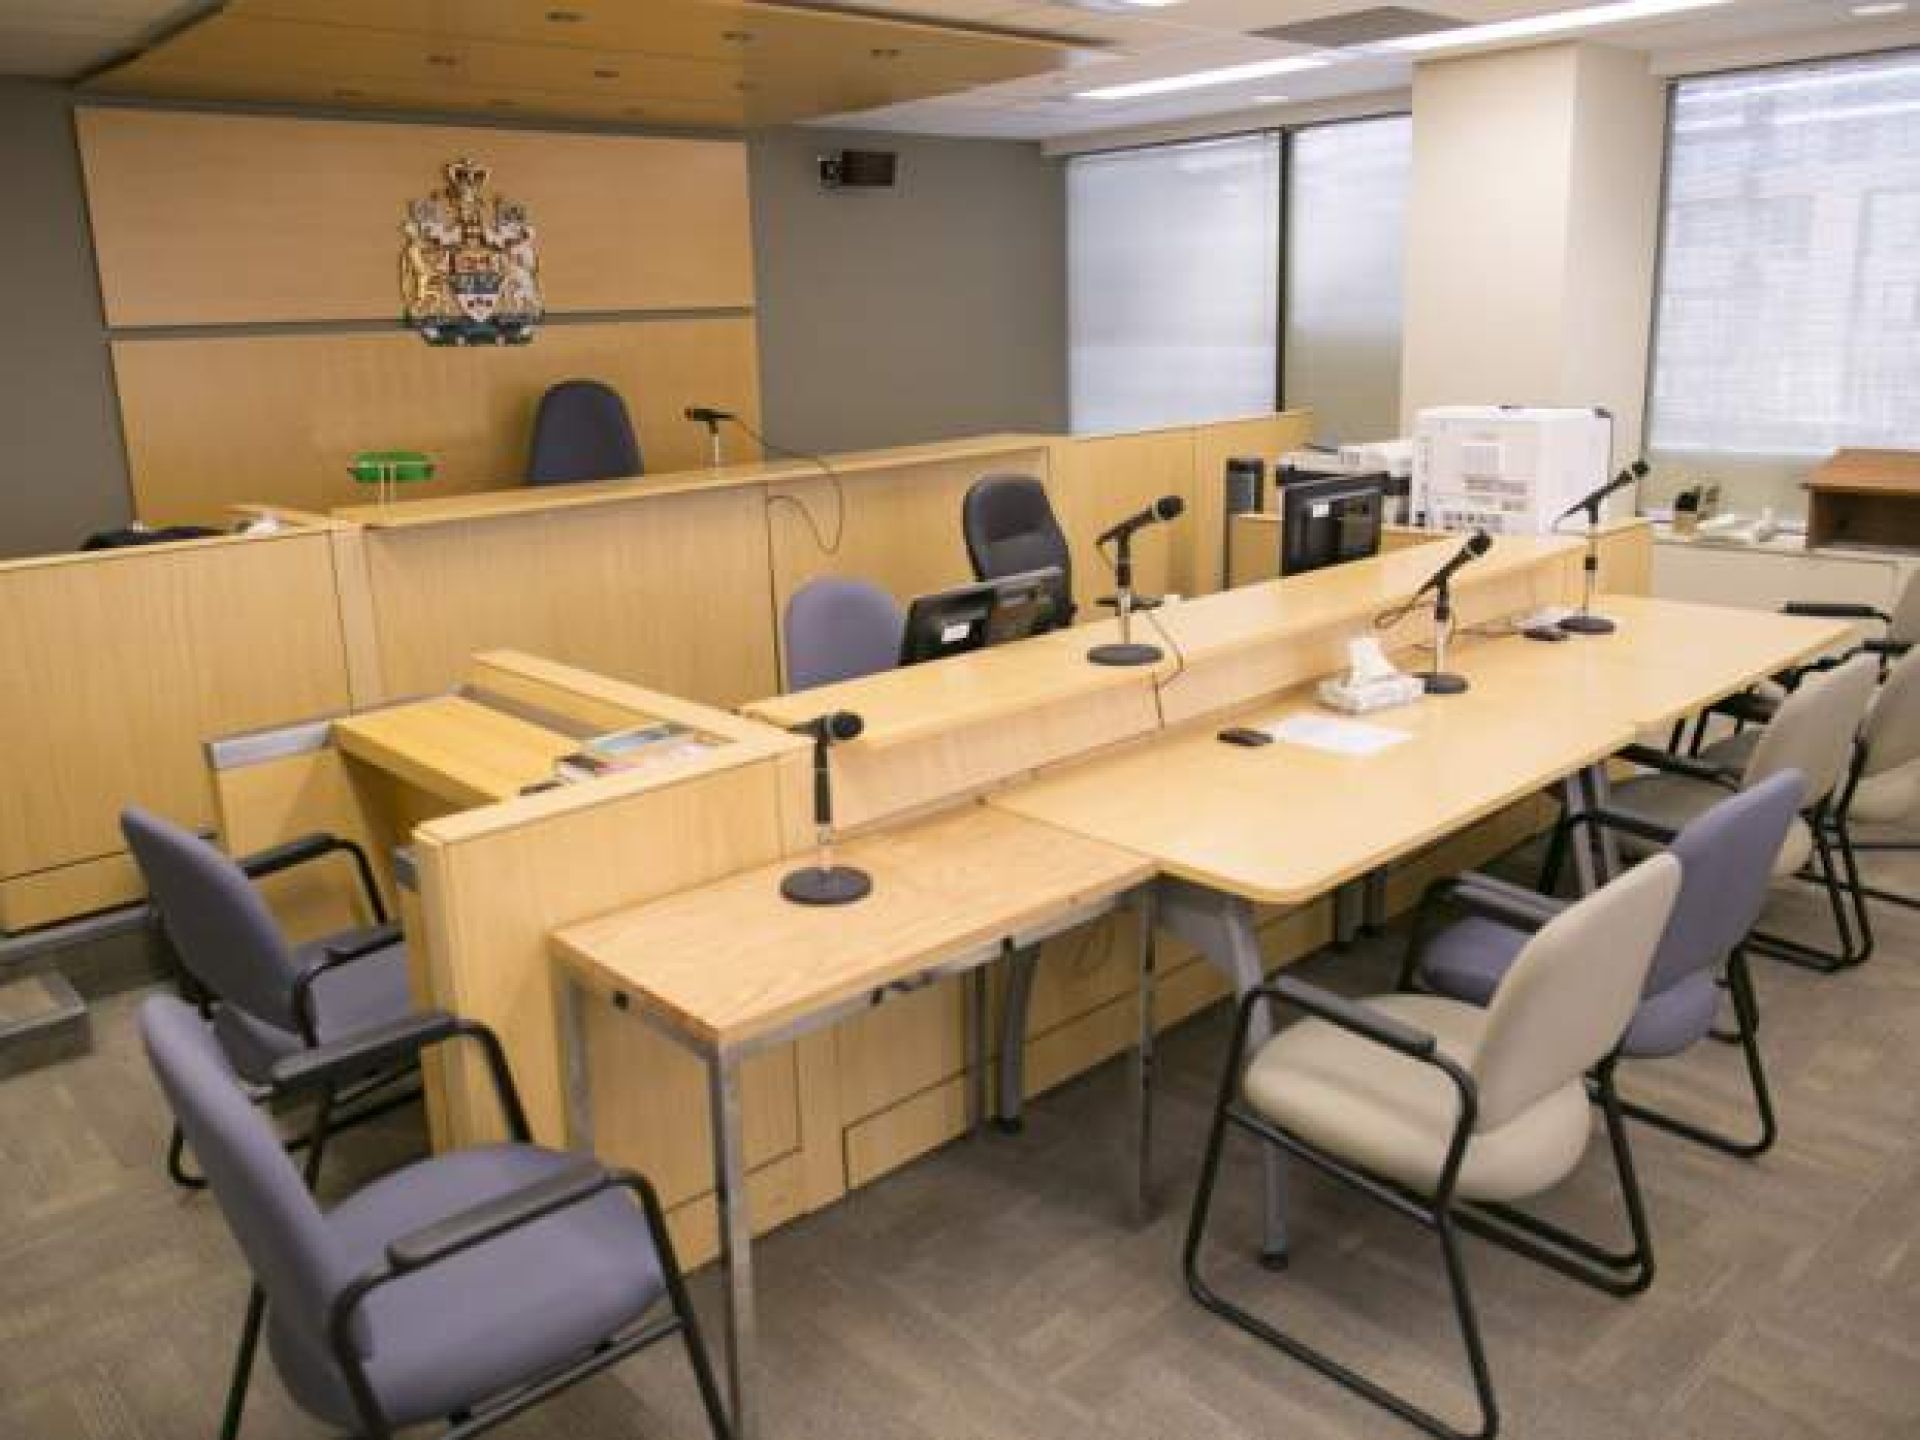 photograph showing the inside a of a typical family court